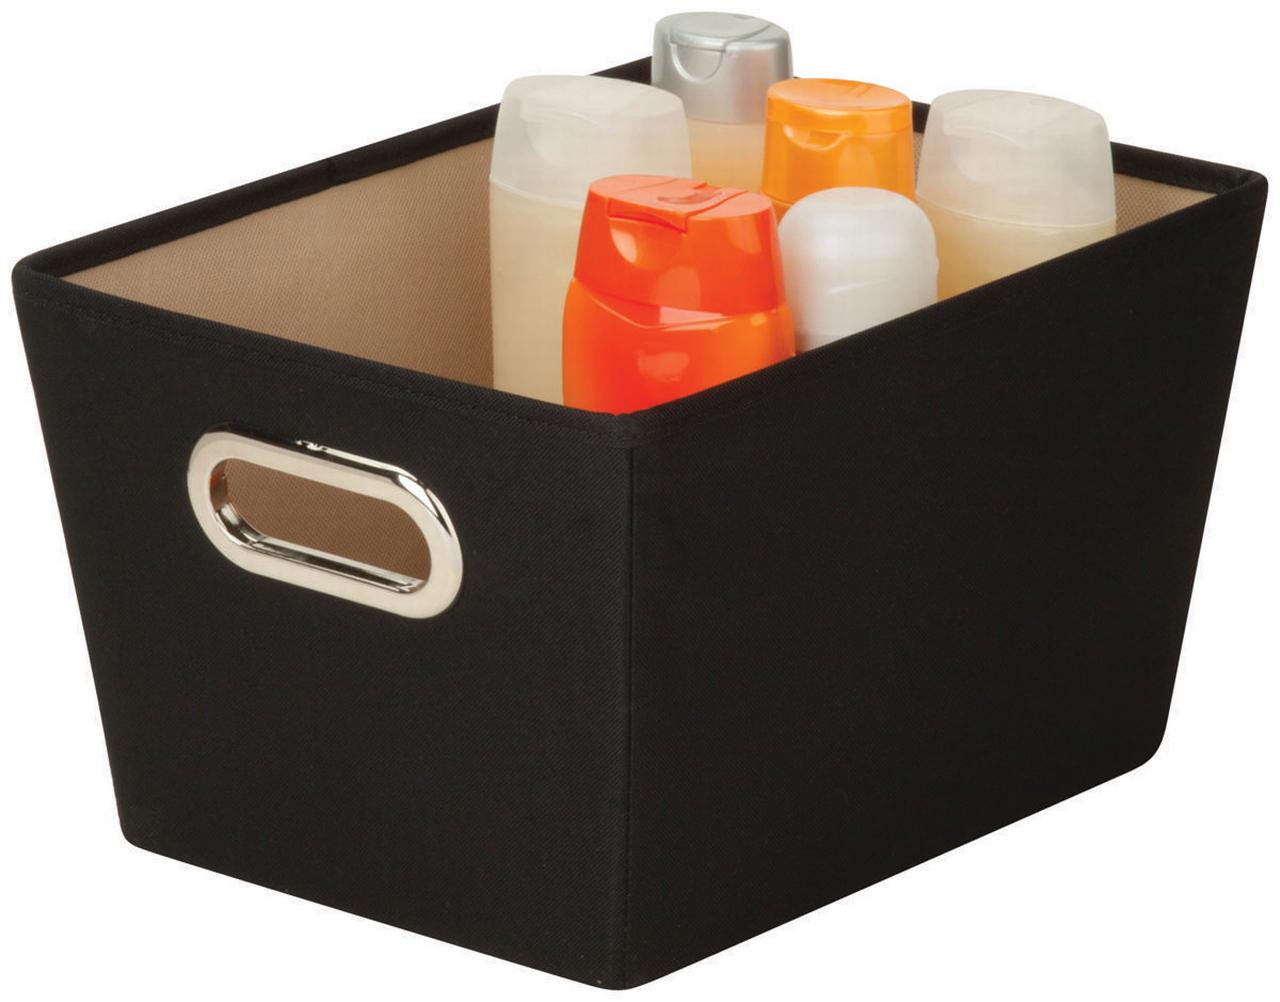 Honey-Can-Do Polyester Storage Bin with Handles, Black - image 1 of 3